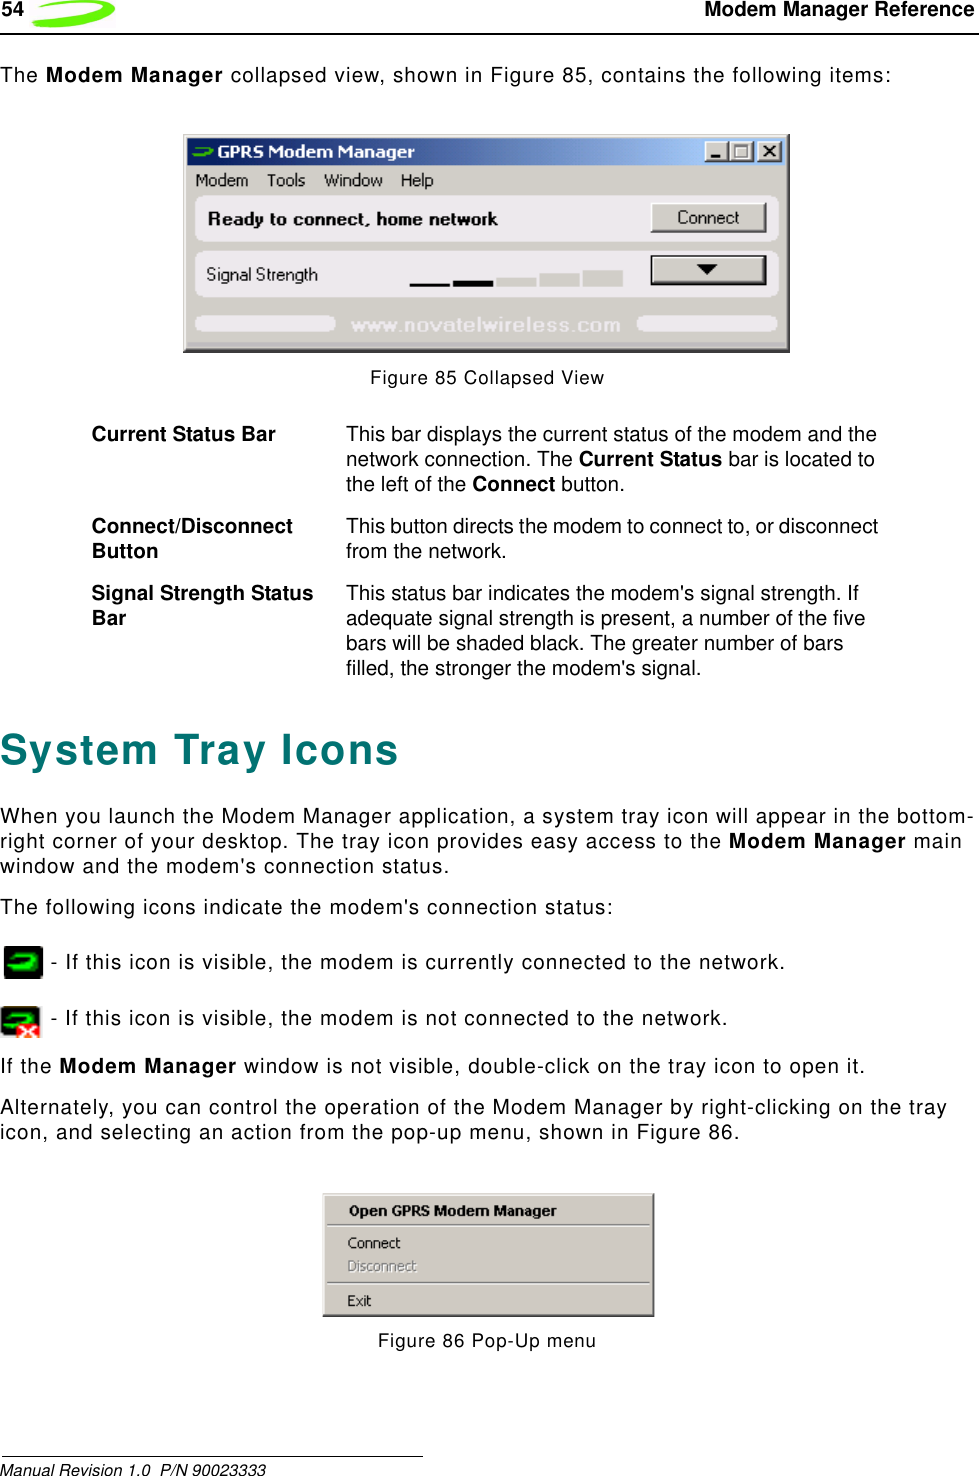 54  Modem Manager ReferenceManual Revision 1.0  P/N 90023333 The Modem Manager collapsed view, shown in Figure 85, contains the following items:Figure 85 Collapsed ViewSystem Tray IconsWhen you launch the Modem Manager application, a system tray icon will appear in the bottom-right corner of your desktop. The tray icon provides easy access to the Modem Manager main window and the modem&apos;s connection status.The following icons indicate the modem&apos;s connection status: - If this icon is visible, the modem is currently connected to the network.  - If this icon is visible, the modem is not connected to the network.If the Modem Manager window is not visible, double-click on the tray icon to open it.Alternately, you can control the operation of the Modem Manager by right-clicking on the tray icon, and selecting an action from the pop-up menu, shown in Figure 86.Figure 86 Pop-Up menuCurrent Status Bar This bar displays the current status of the modem and the network connection. The Current Status bar is located to the left of the Connect button.Connect/Disconnect Button This button directs the modem to connect to, or disconnect from the network.Signal Strength Status Bar This status bar indicates the modem&apos;s signal strength. If adequate signal strength is present, a number of the five bars will be shaded black. The greater number of bars filled, the stronger the modem&apos;s signal.